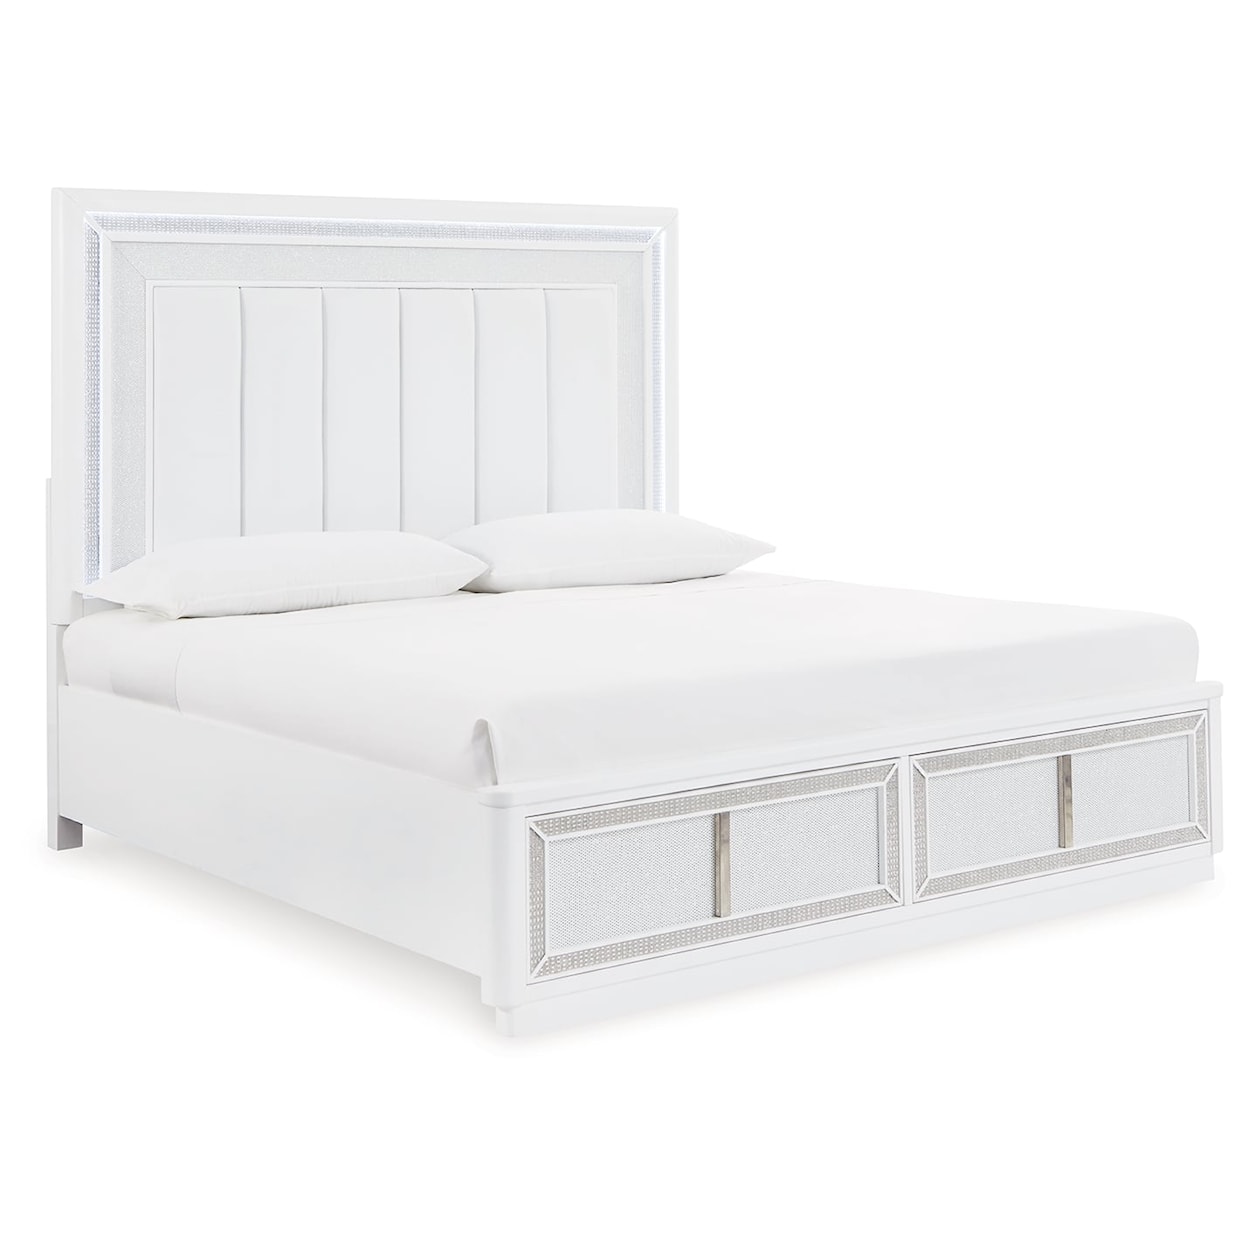 Signature Design by Ashley Chalanna California King Upholstered Storage Bed